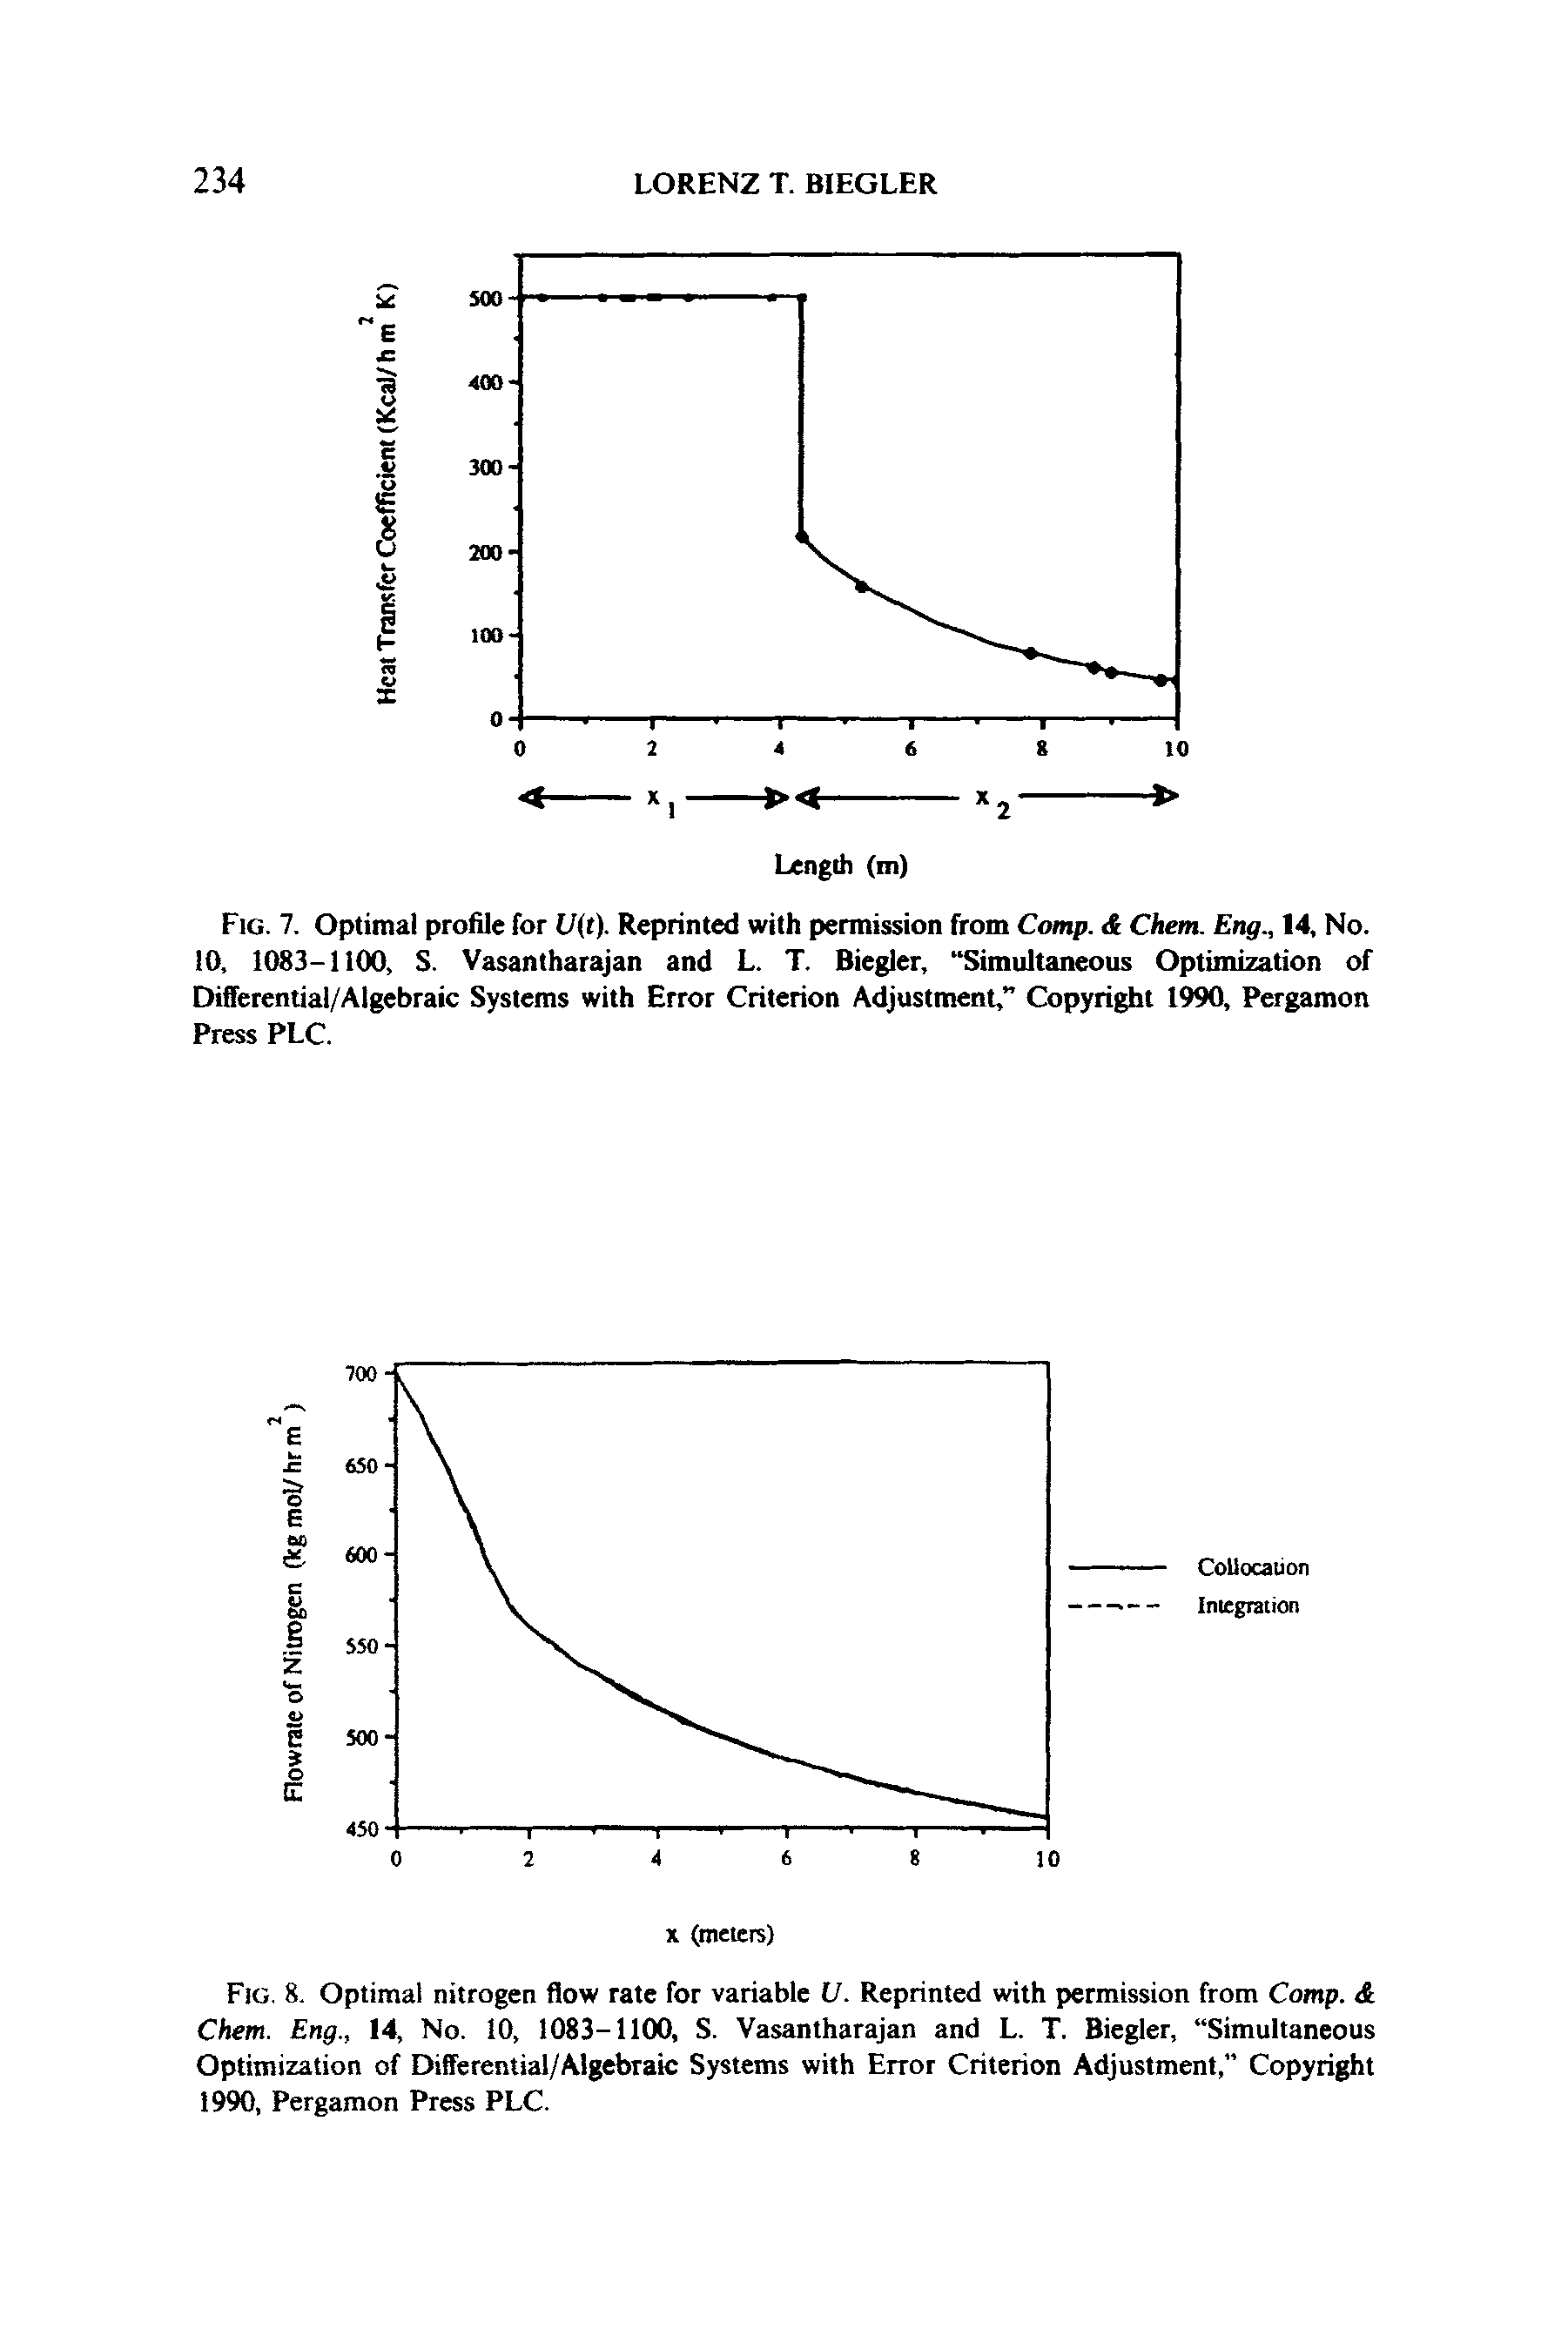 Fig. 8. Optimal nitrogen flow rate for variable V. Reprinted with permission from Comp. Chem. Eng., 14, No. 10, 1083-1100, S. Vasantharajan and L. T. Biegler, Simultaneous Optimization of Differential/Algebraic Systems with Error Criterion Adjustment, Copyright 1990, Pergamon Press PLC.